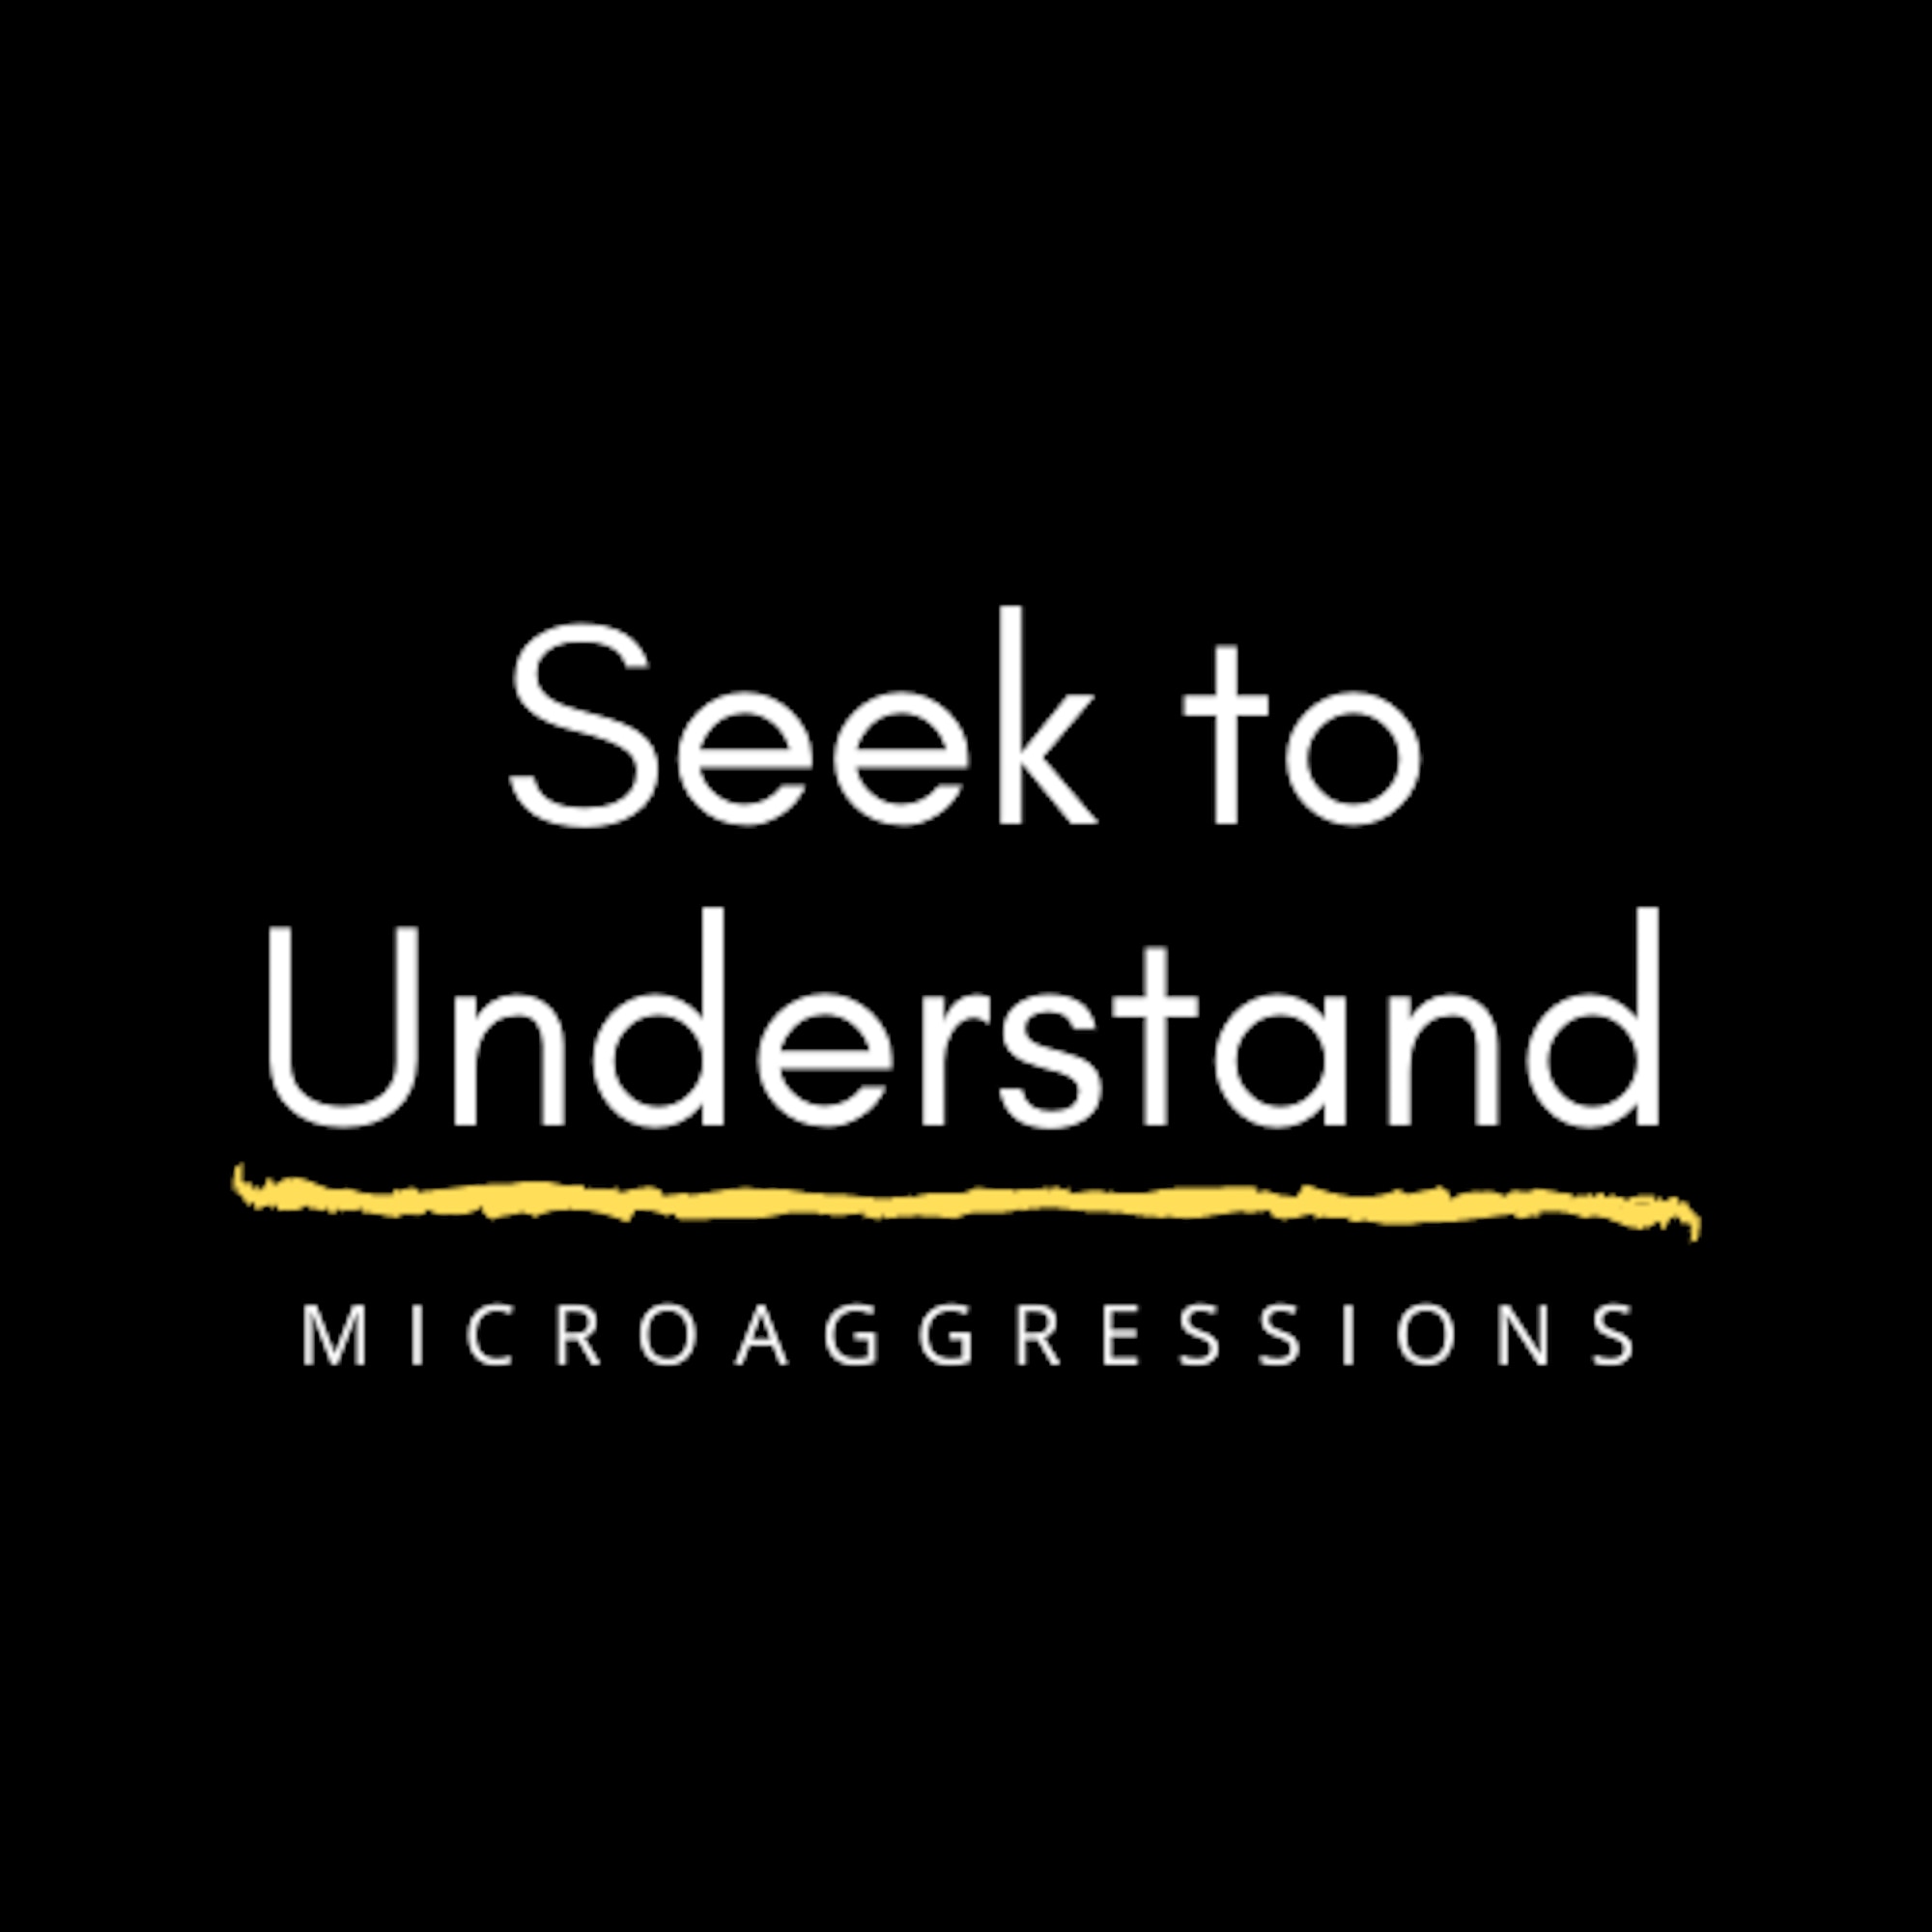 Air Education and Training Command launched the first episode of its series, "Seek to Understand," during which the term "microaggressions" is defined, and an Airman narrates a personal experience. The purpose of this series is to address racial disparity and foster understanding of the unique experiences of Airmen who come from varying walks of life.